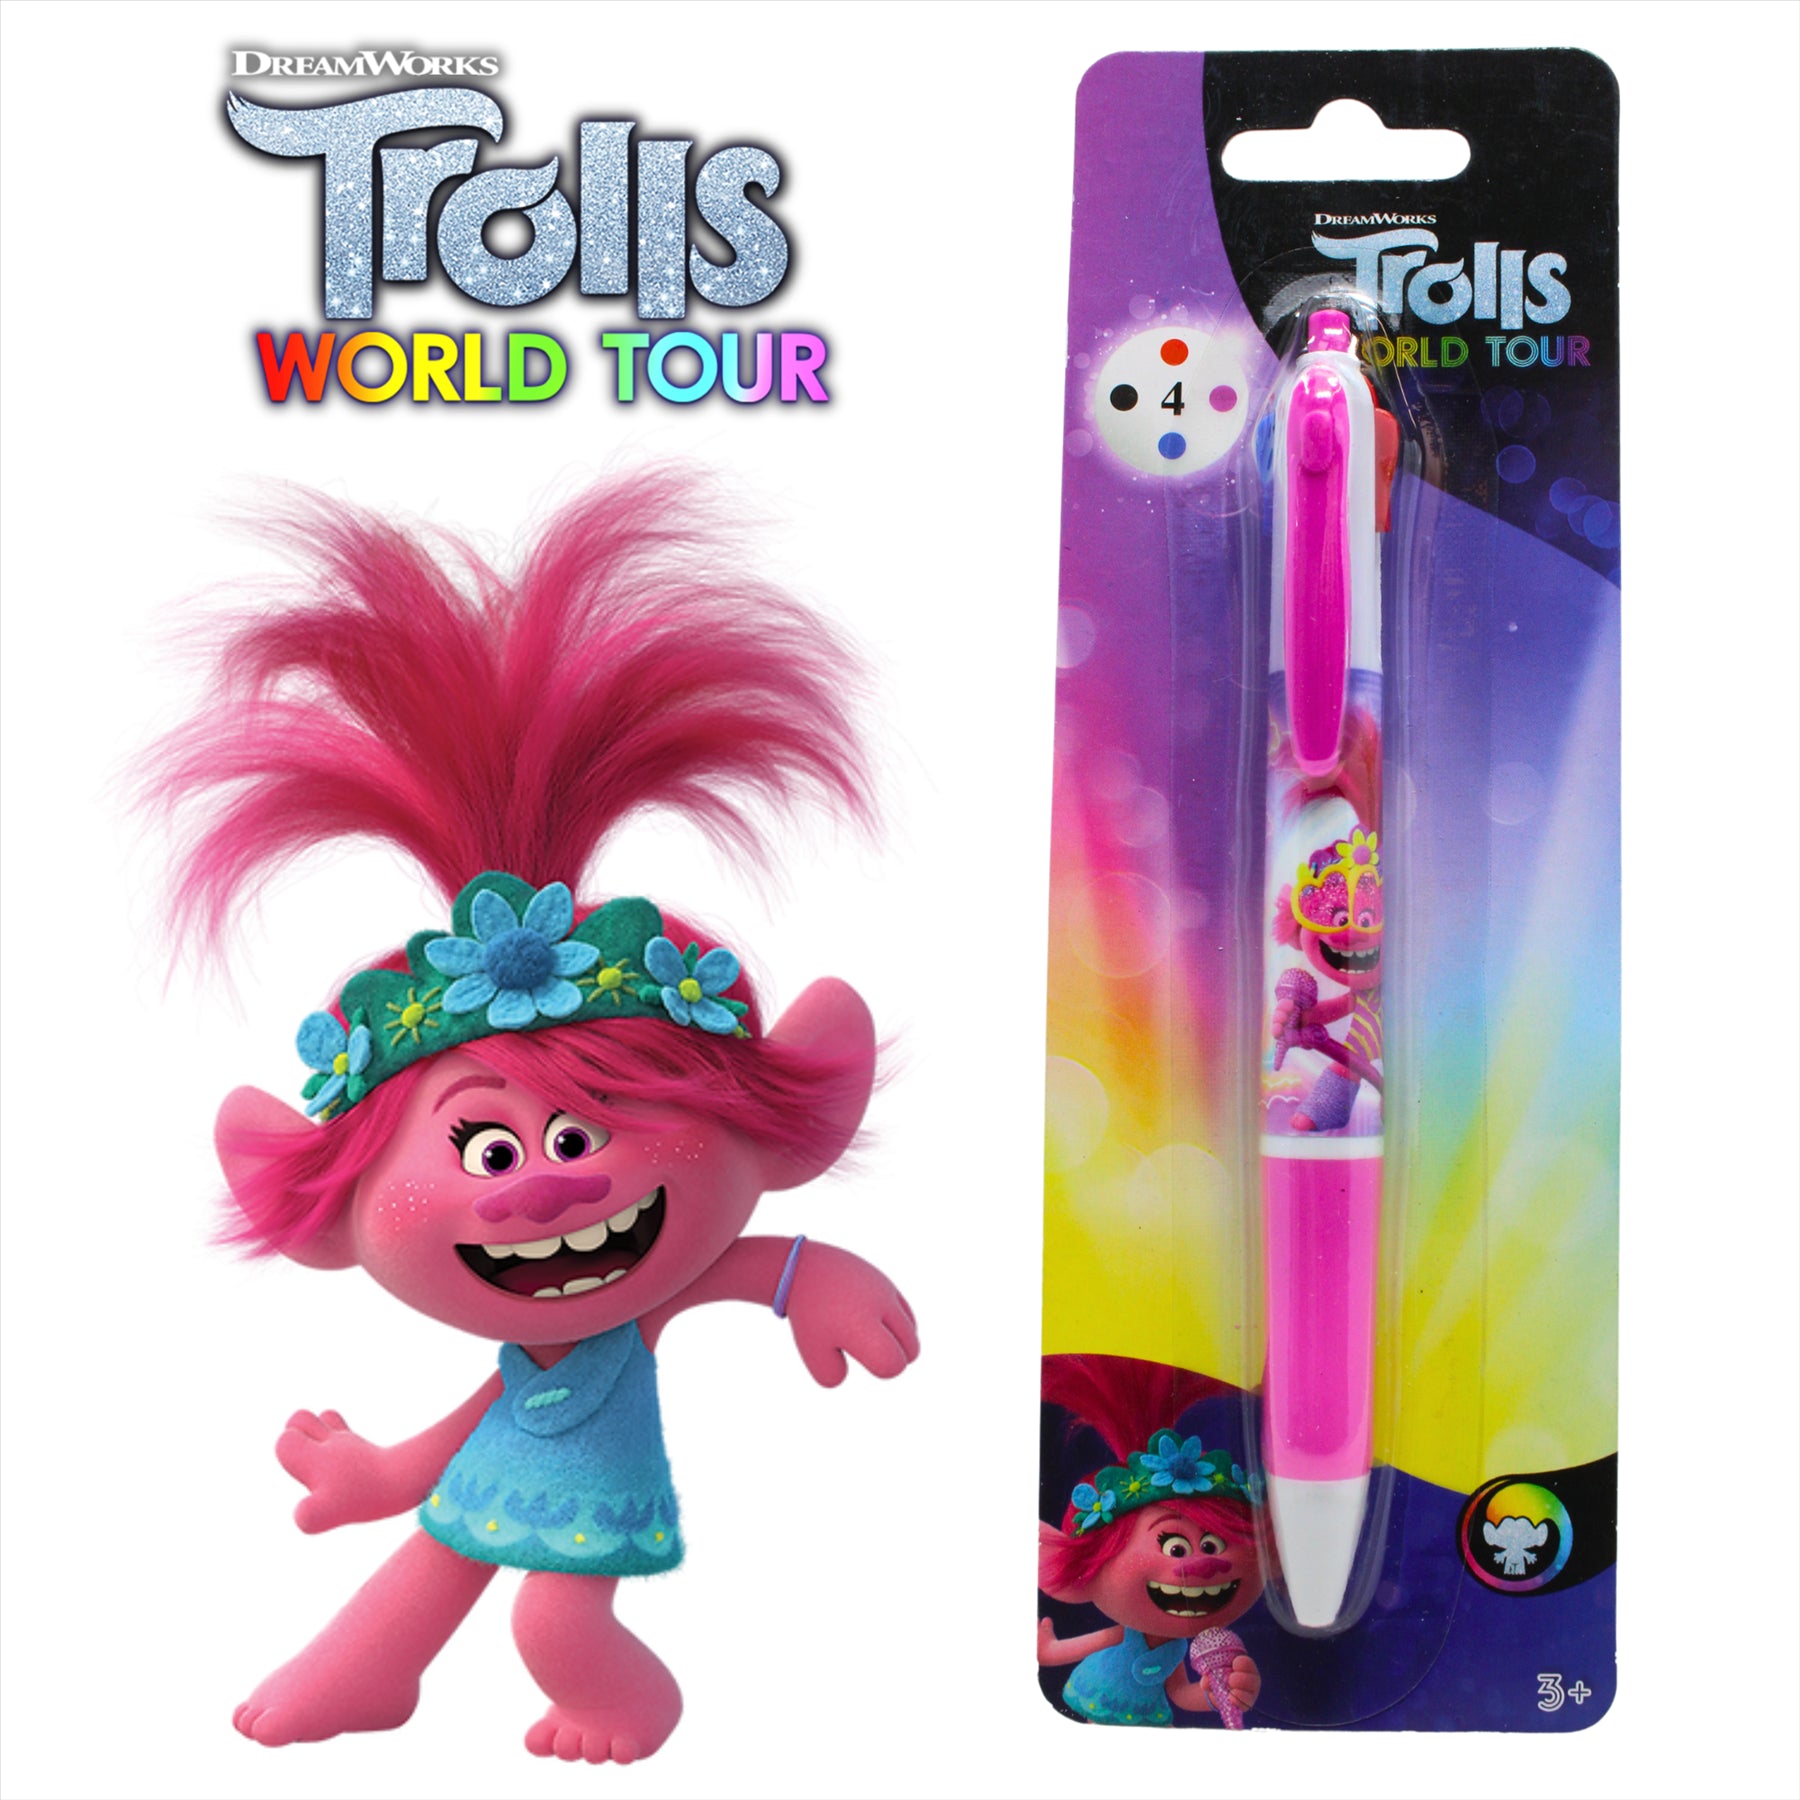 Trolls World Tour Poppy Multi Colour Pen - Red, Blue, Black, and Pink